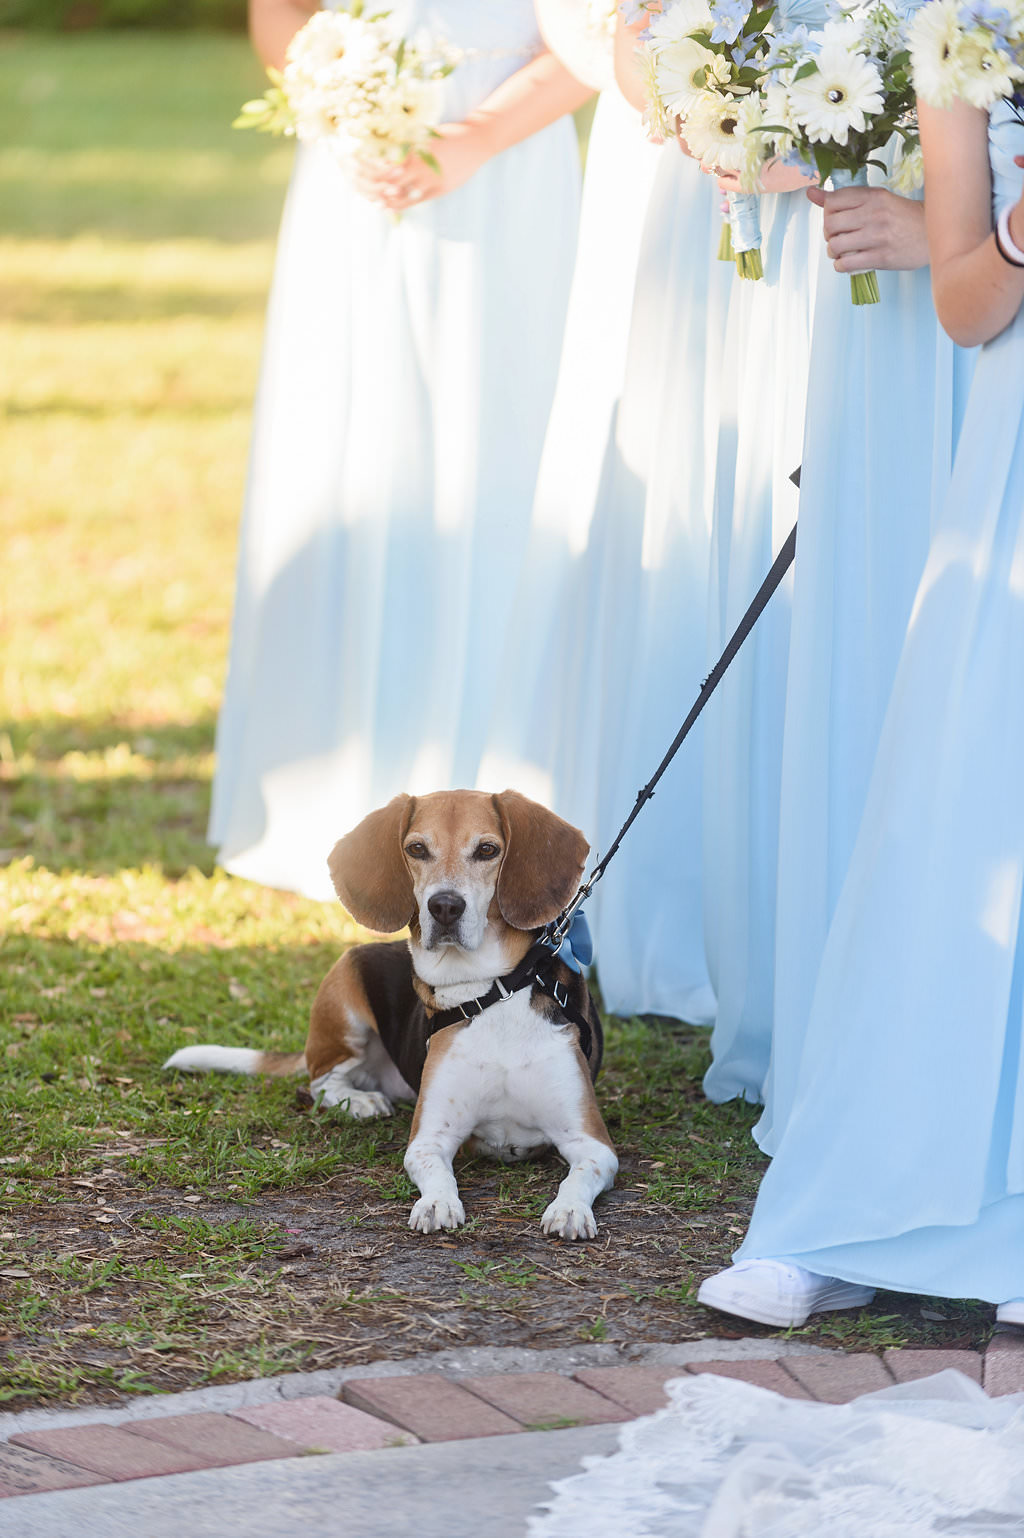 Outdoor Wedding Dog Portrait and Bridal Party Wearing Light Blue Bridesmaid Dresses Holding White and Greenery Floral Bouquets | Wedding Pet Coordinating from Tampa Bay Fairy Tail Pet Care | Tampa Bay Wedding Photographer Marc Edwards Photographs